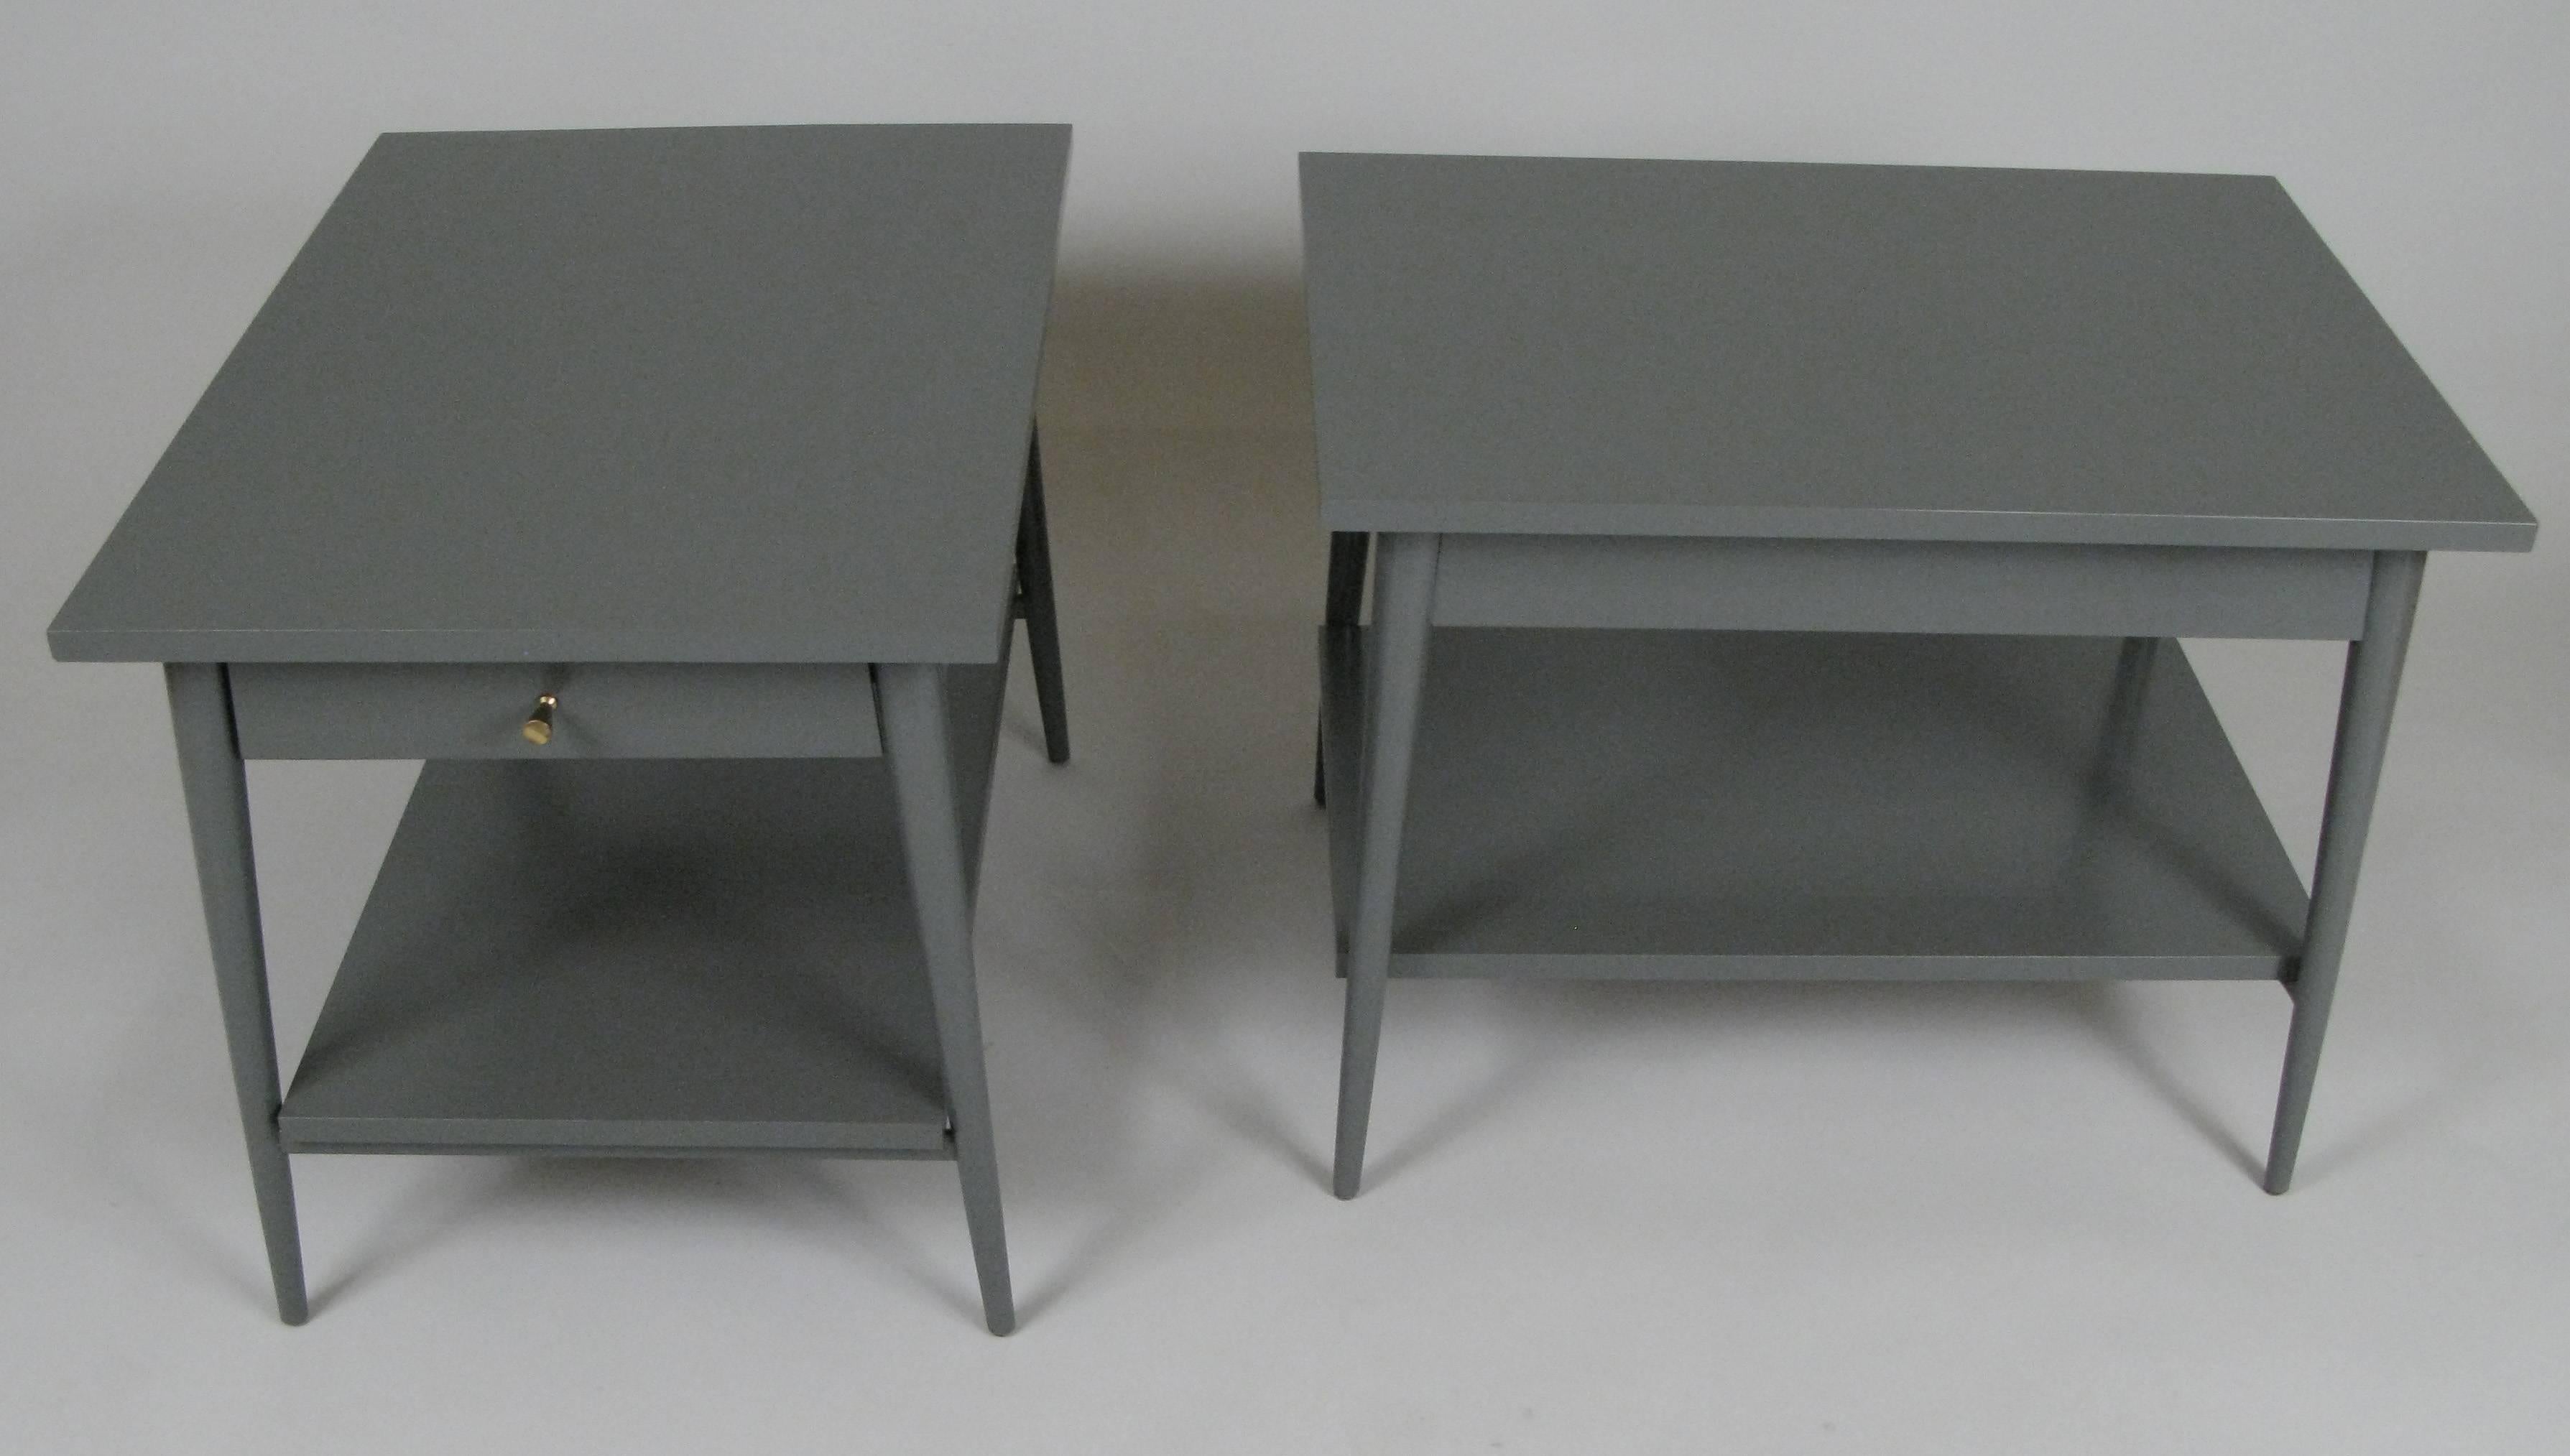 American Pair of Lacquered 1950s Nightstands by Paul McCobb